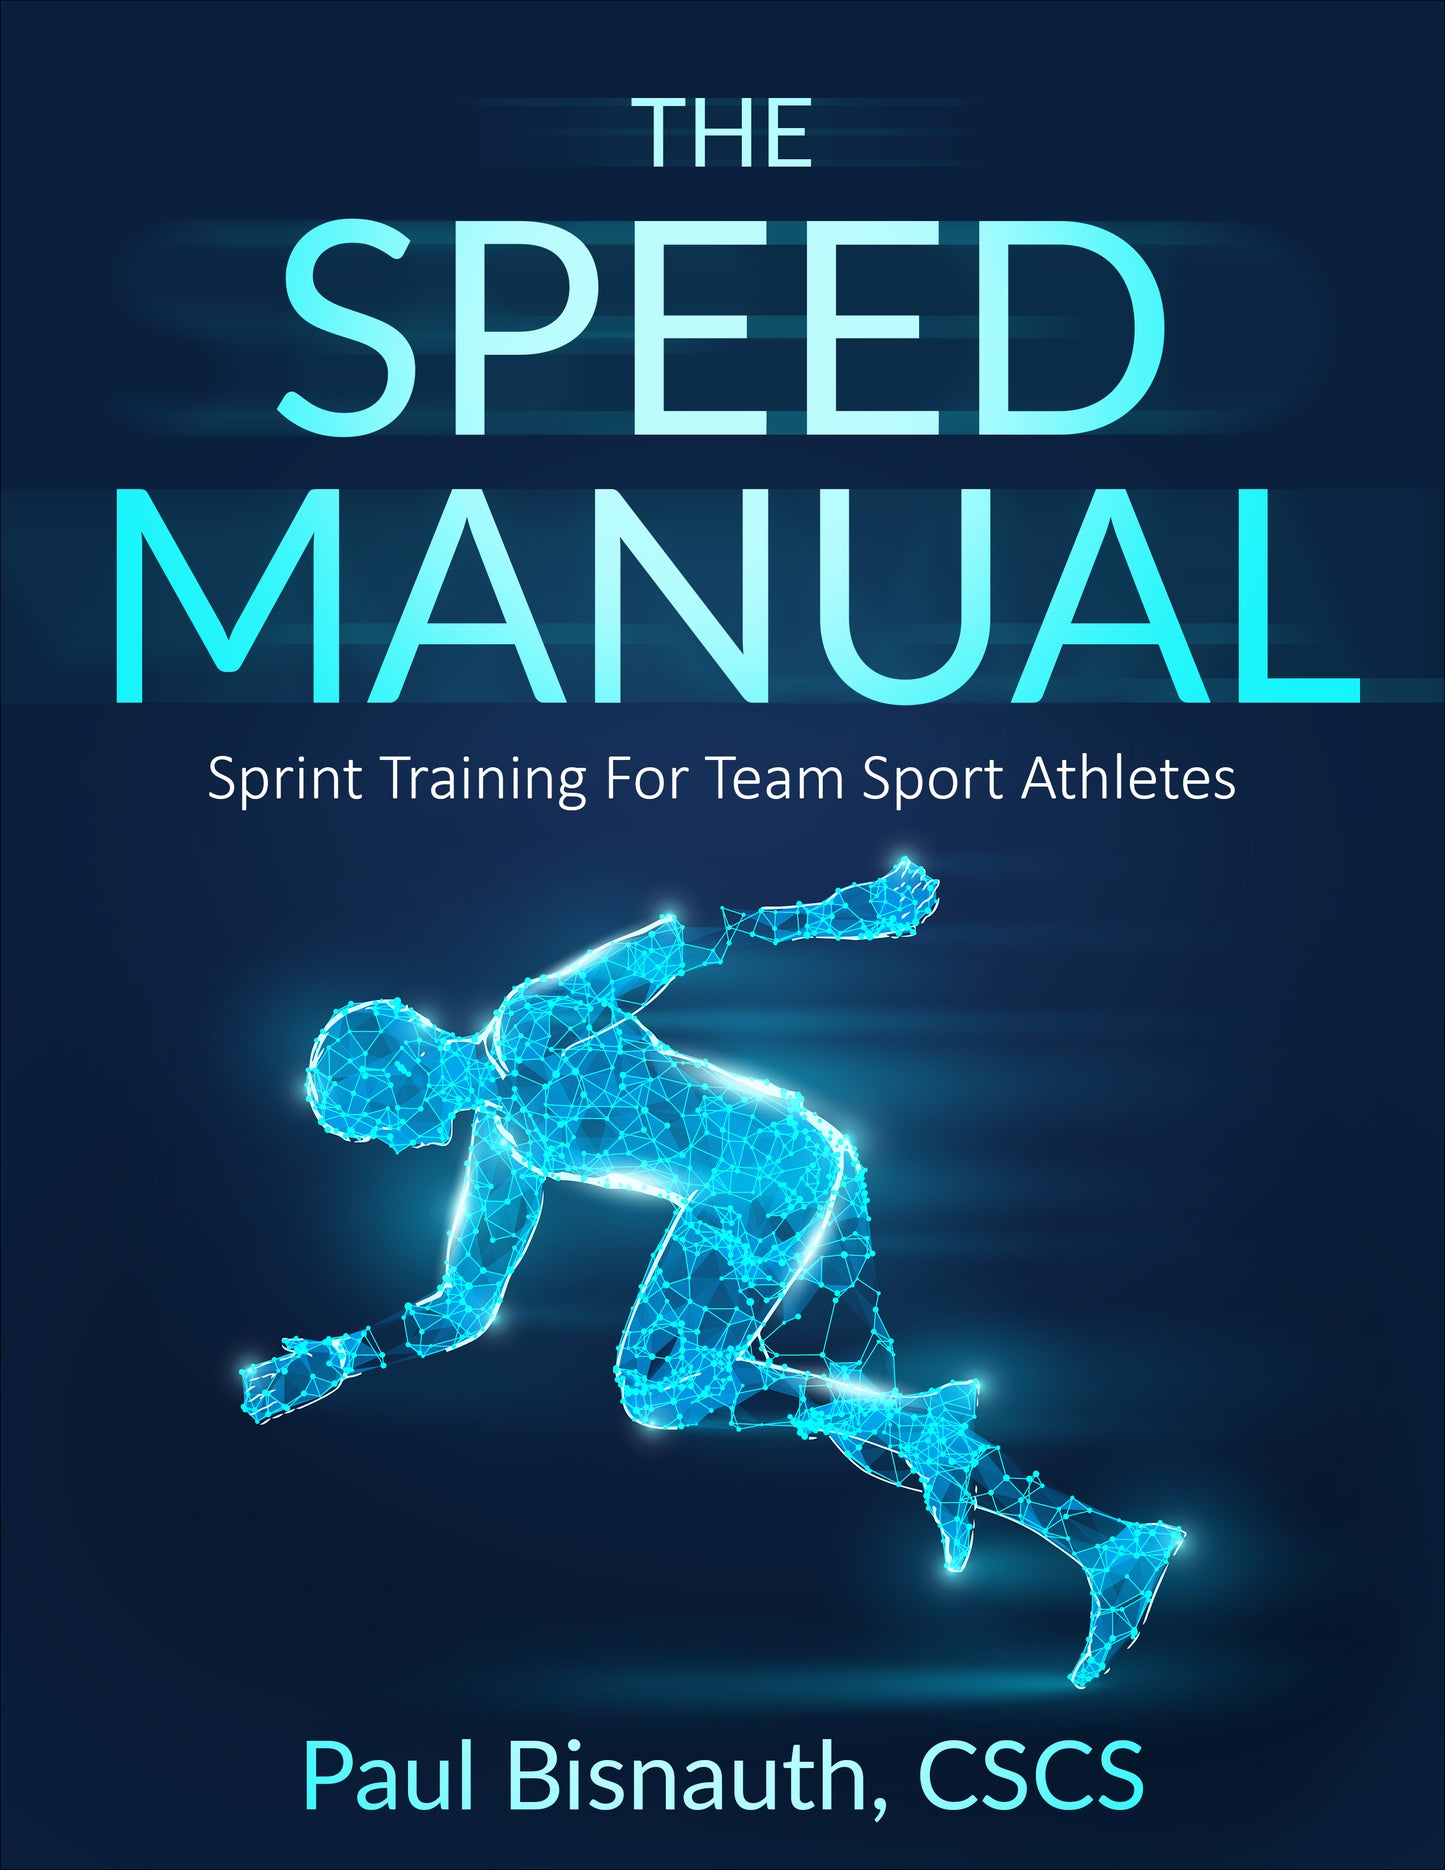 The Speed Manual